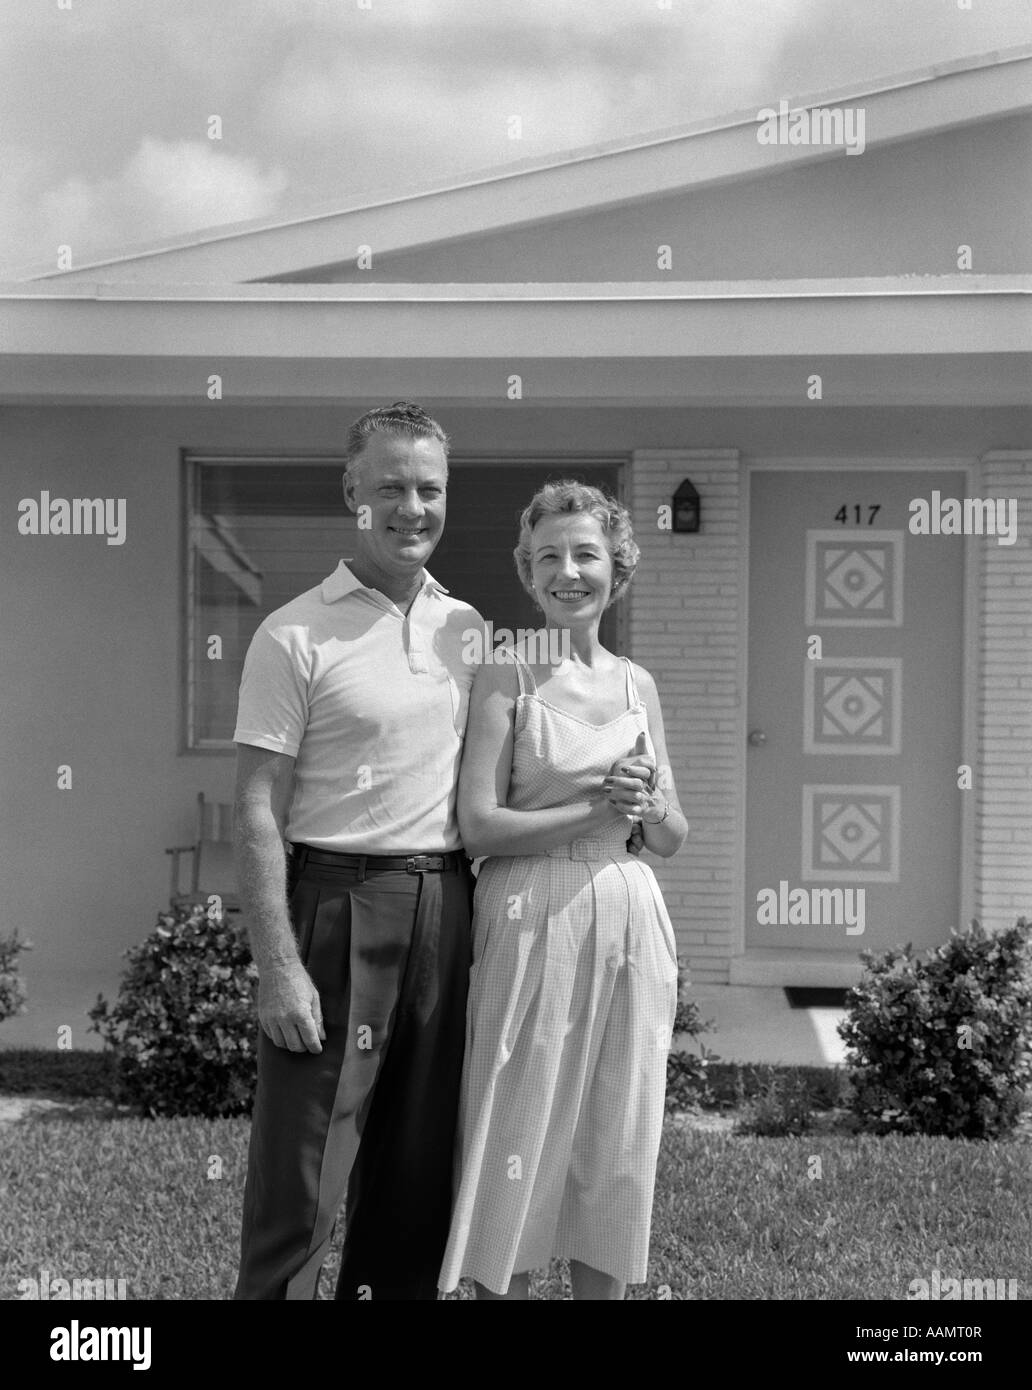 1950s SMILING OLDER MAN WOMAN SENIOR CITIZEN STANDING TOGETHER IN RETIREMENT HOME FRONT YARD LOOKING AT CAMERA Stock Photo